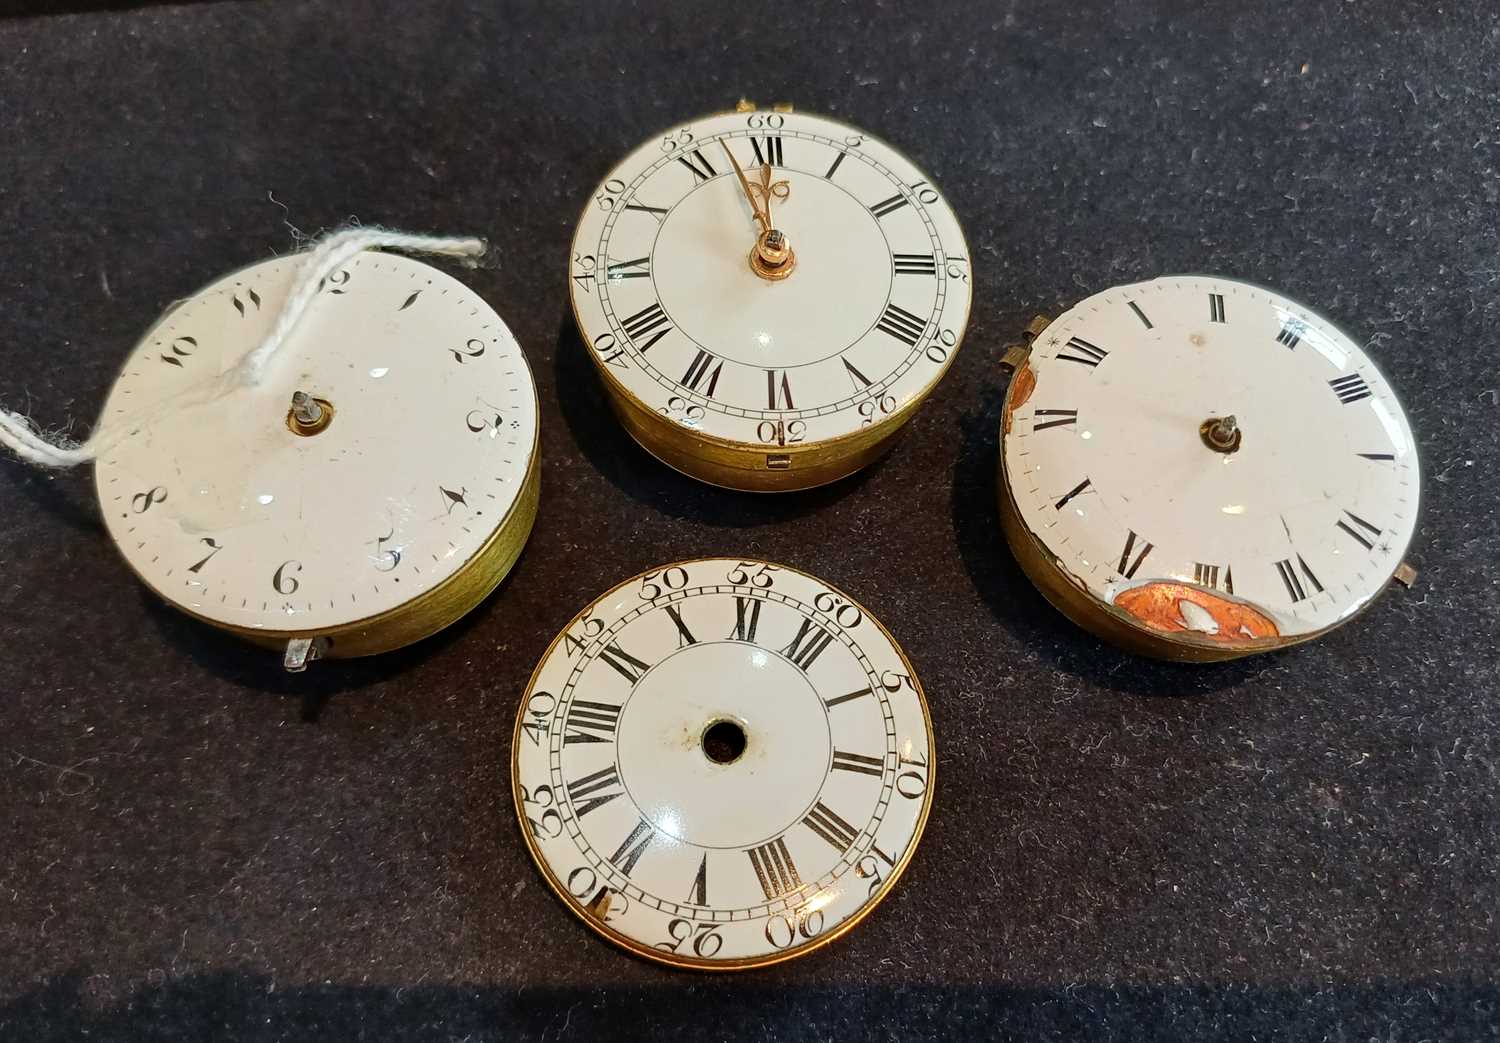 Three 18th Century Pocket Watch Movements, signed Ellicott, London, single chain fusee cylinder - Image 3 of 3